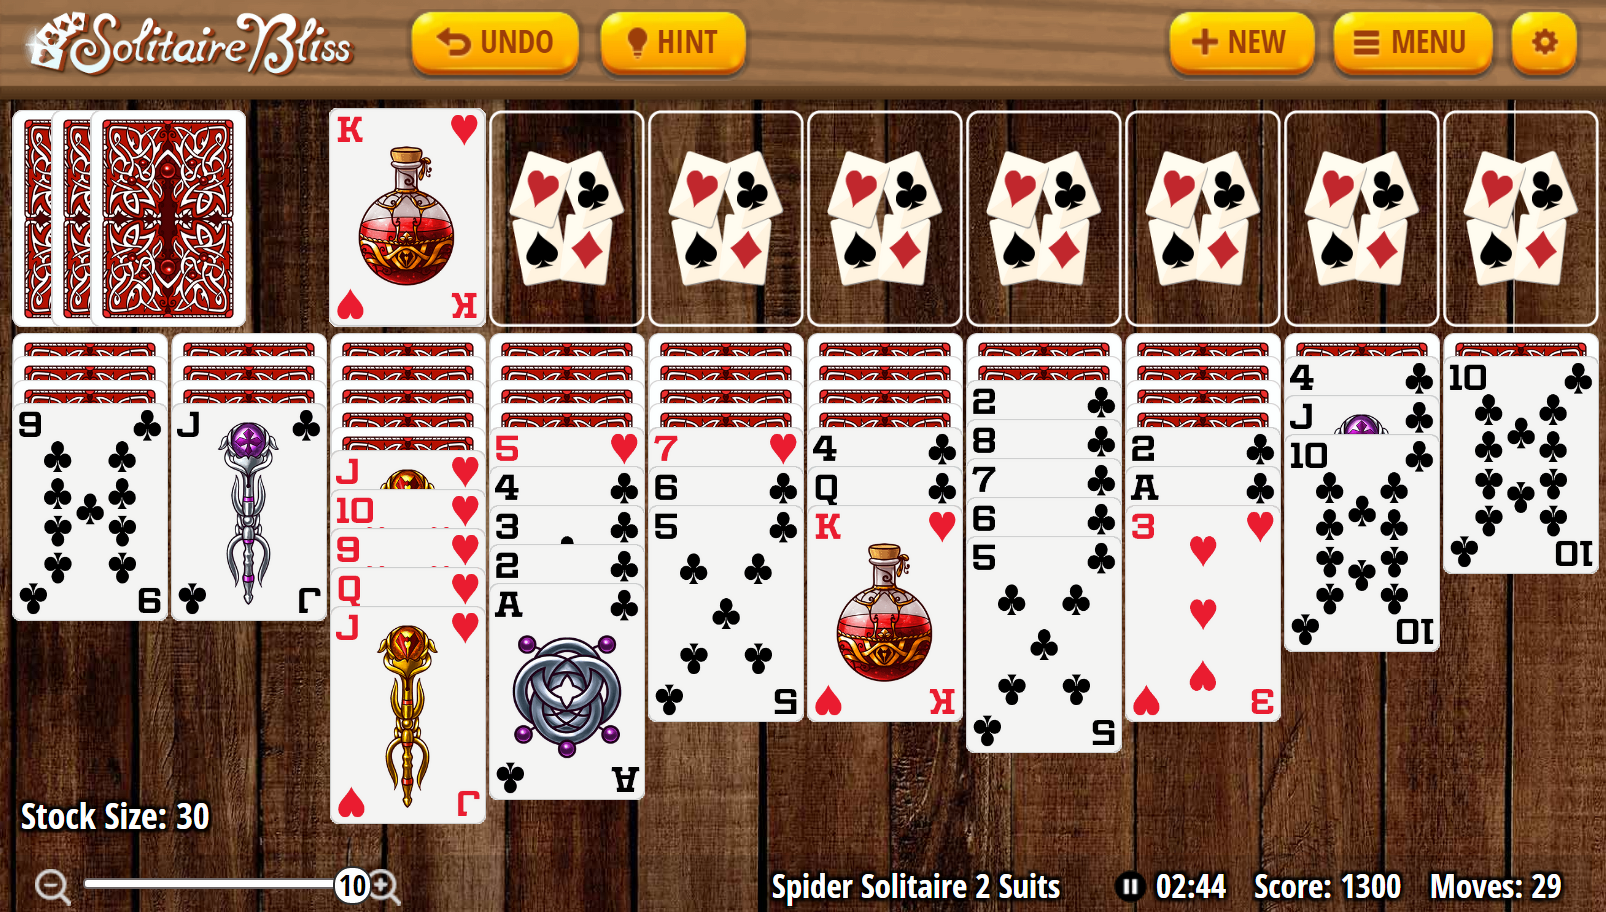 Play 1-Suit, 2-Suit, and 4-Suit Spider Solitaire